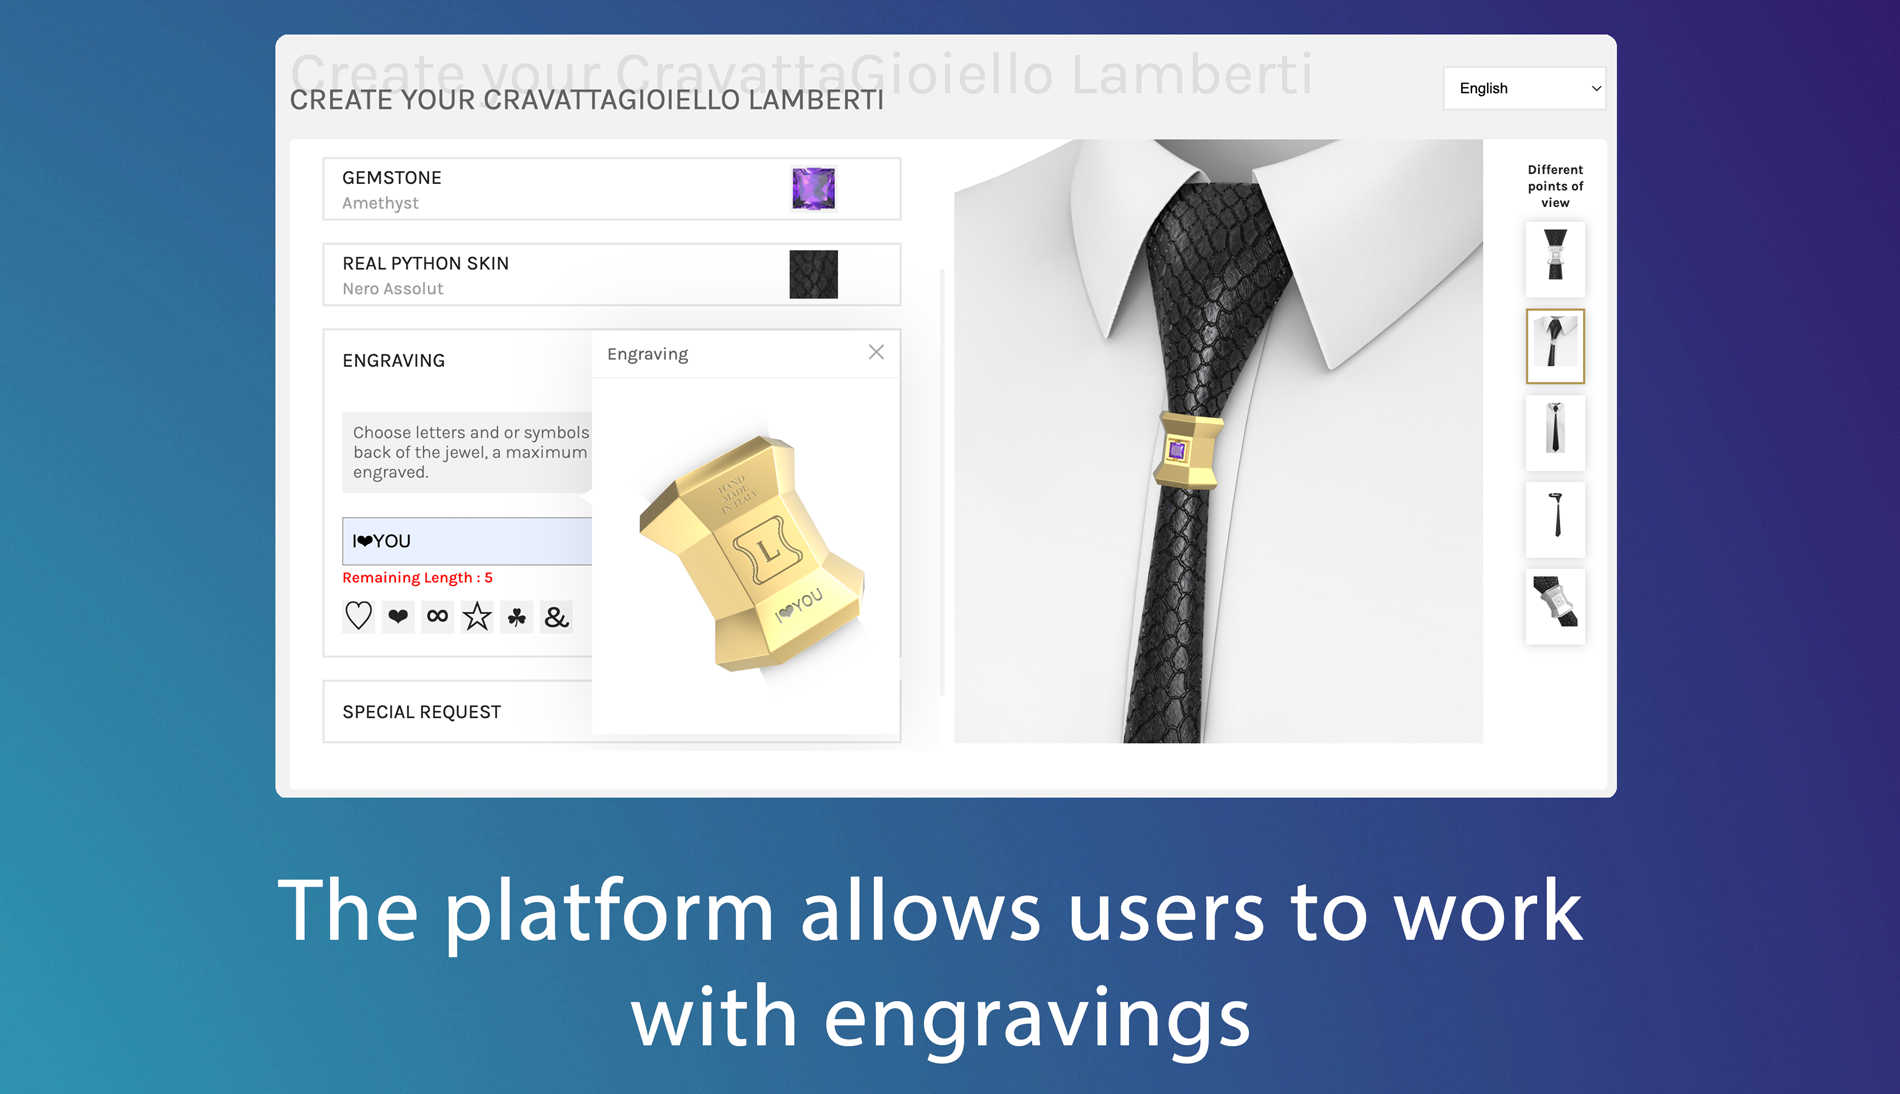 The platform allows users to work with engravings